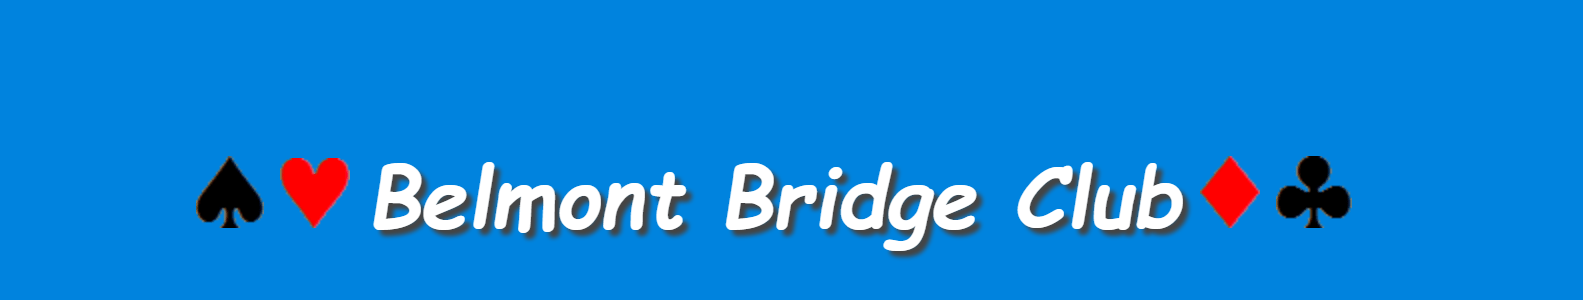 How to Register for Belmont Bridge Club Pairs Games